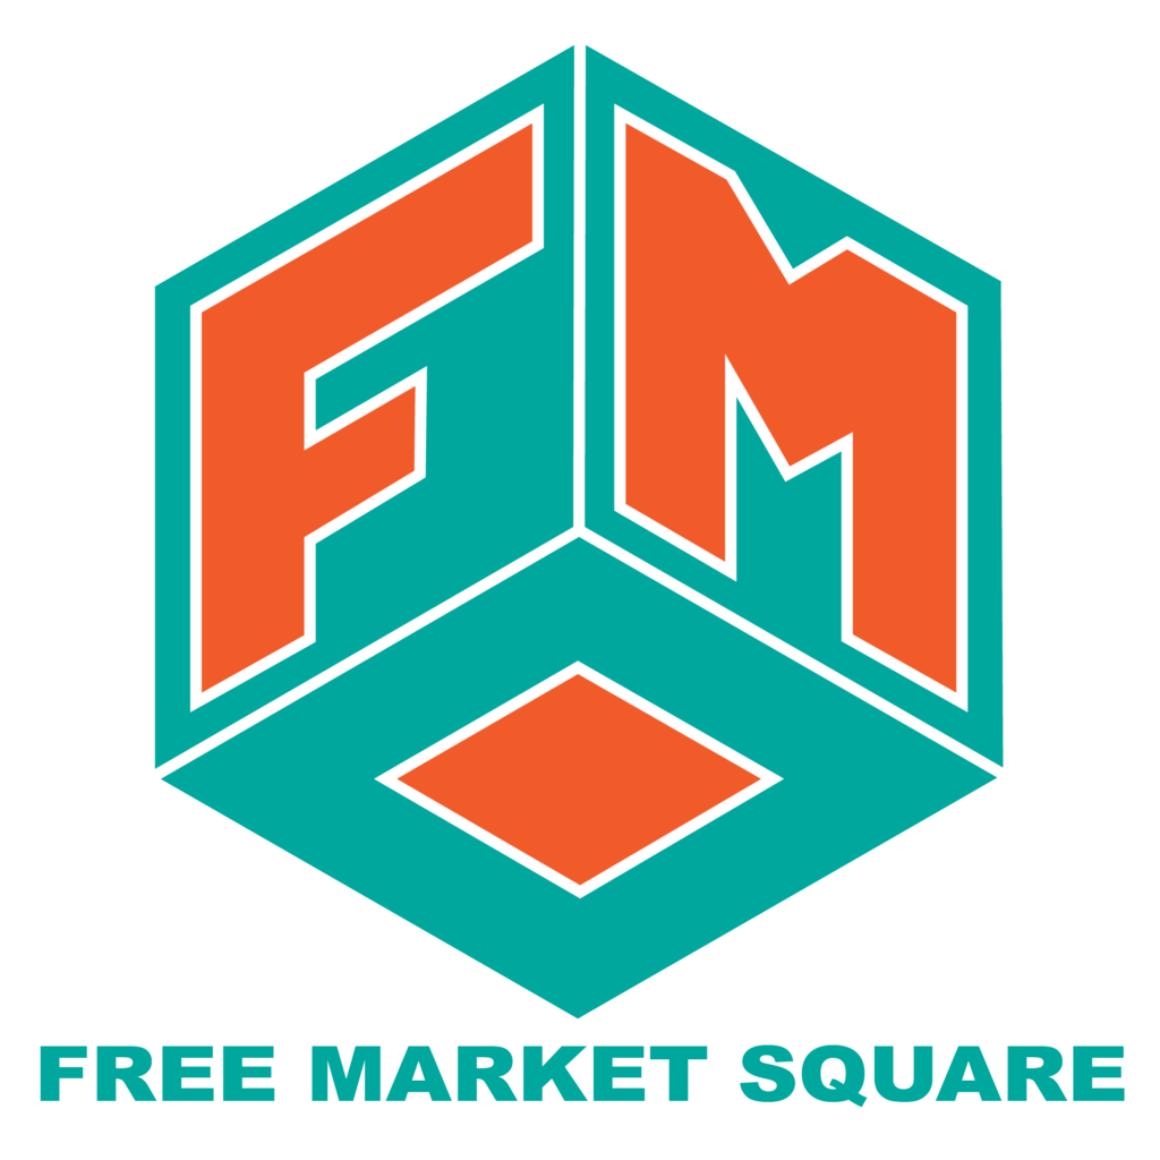 Vendor Opportunity with EEDC: Free Market Square